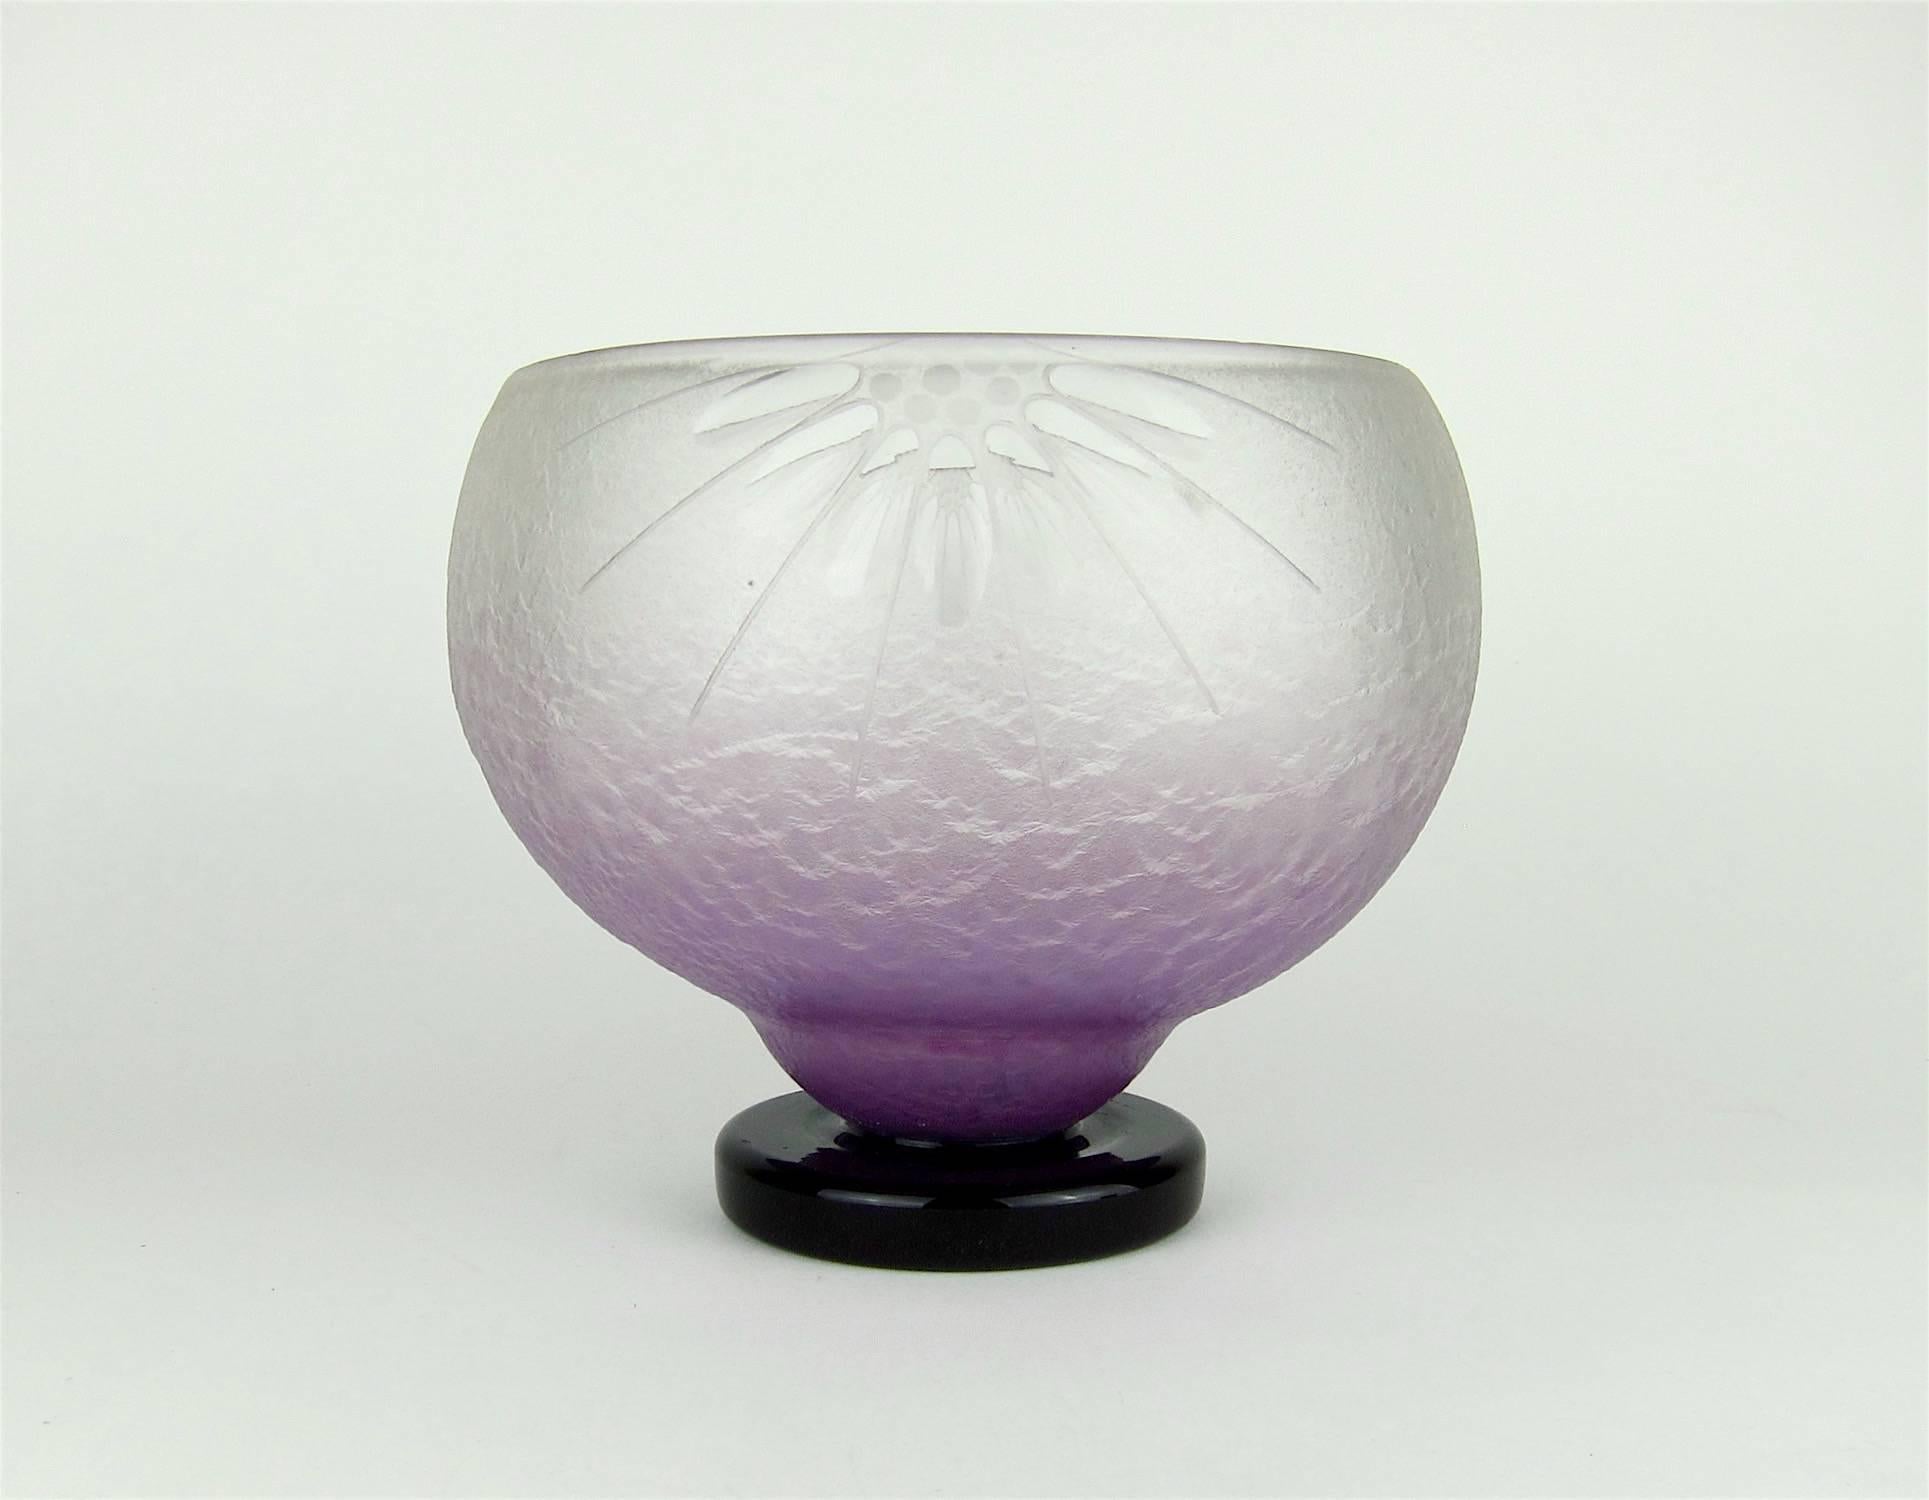 A large and spherical Art Deco vase raised on a circular slab foot by Schneider Art Glass of France, circa 1928. The thick walled and textured design resembles melting ice with a wheel-cut sunburst pattern radiating outward from the upper rim. The